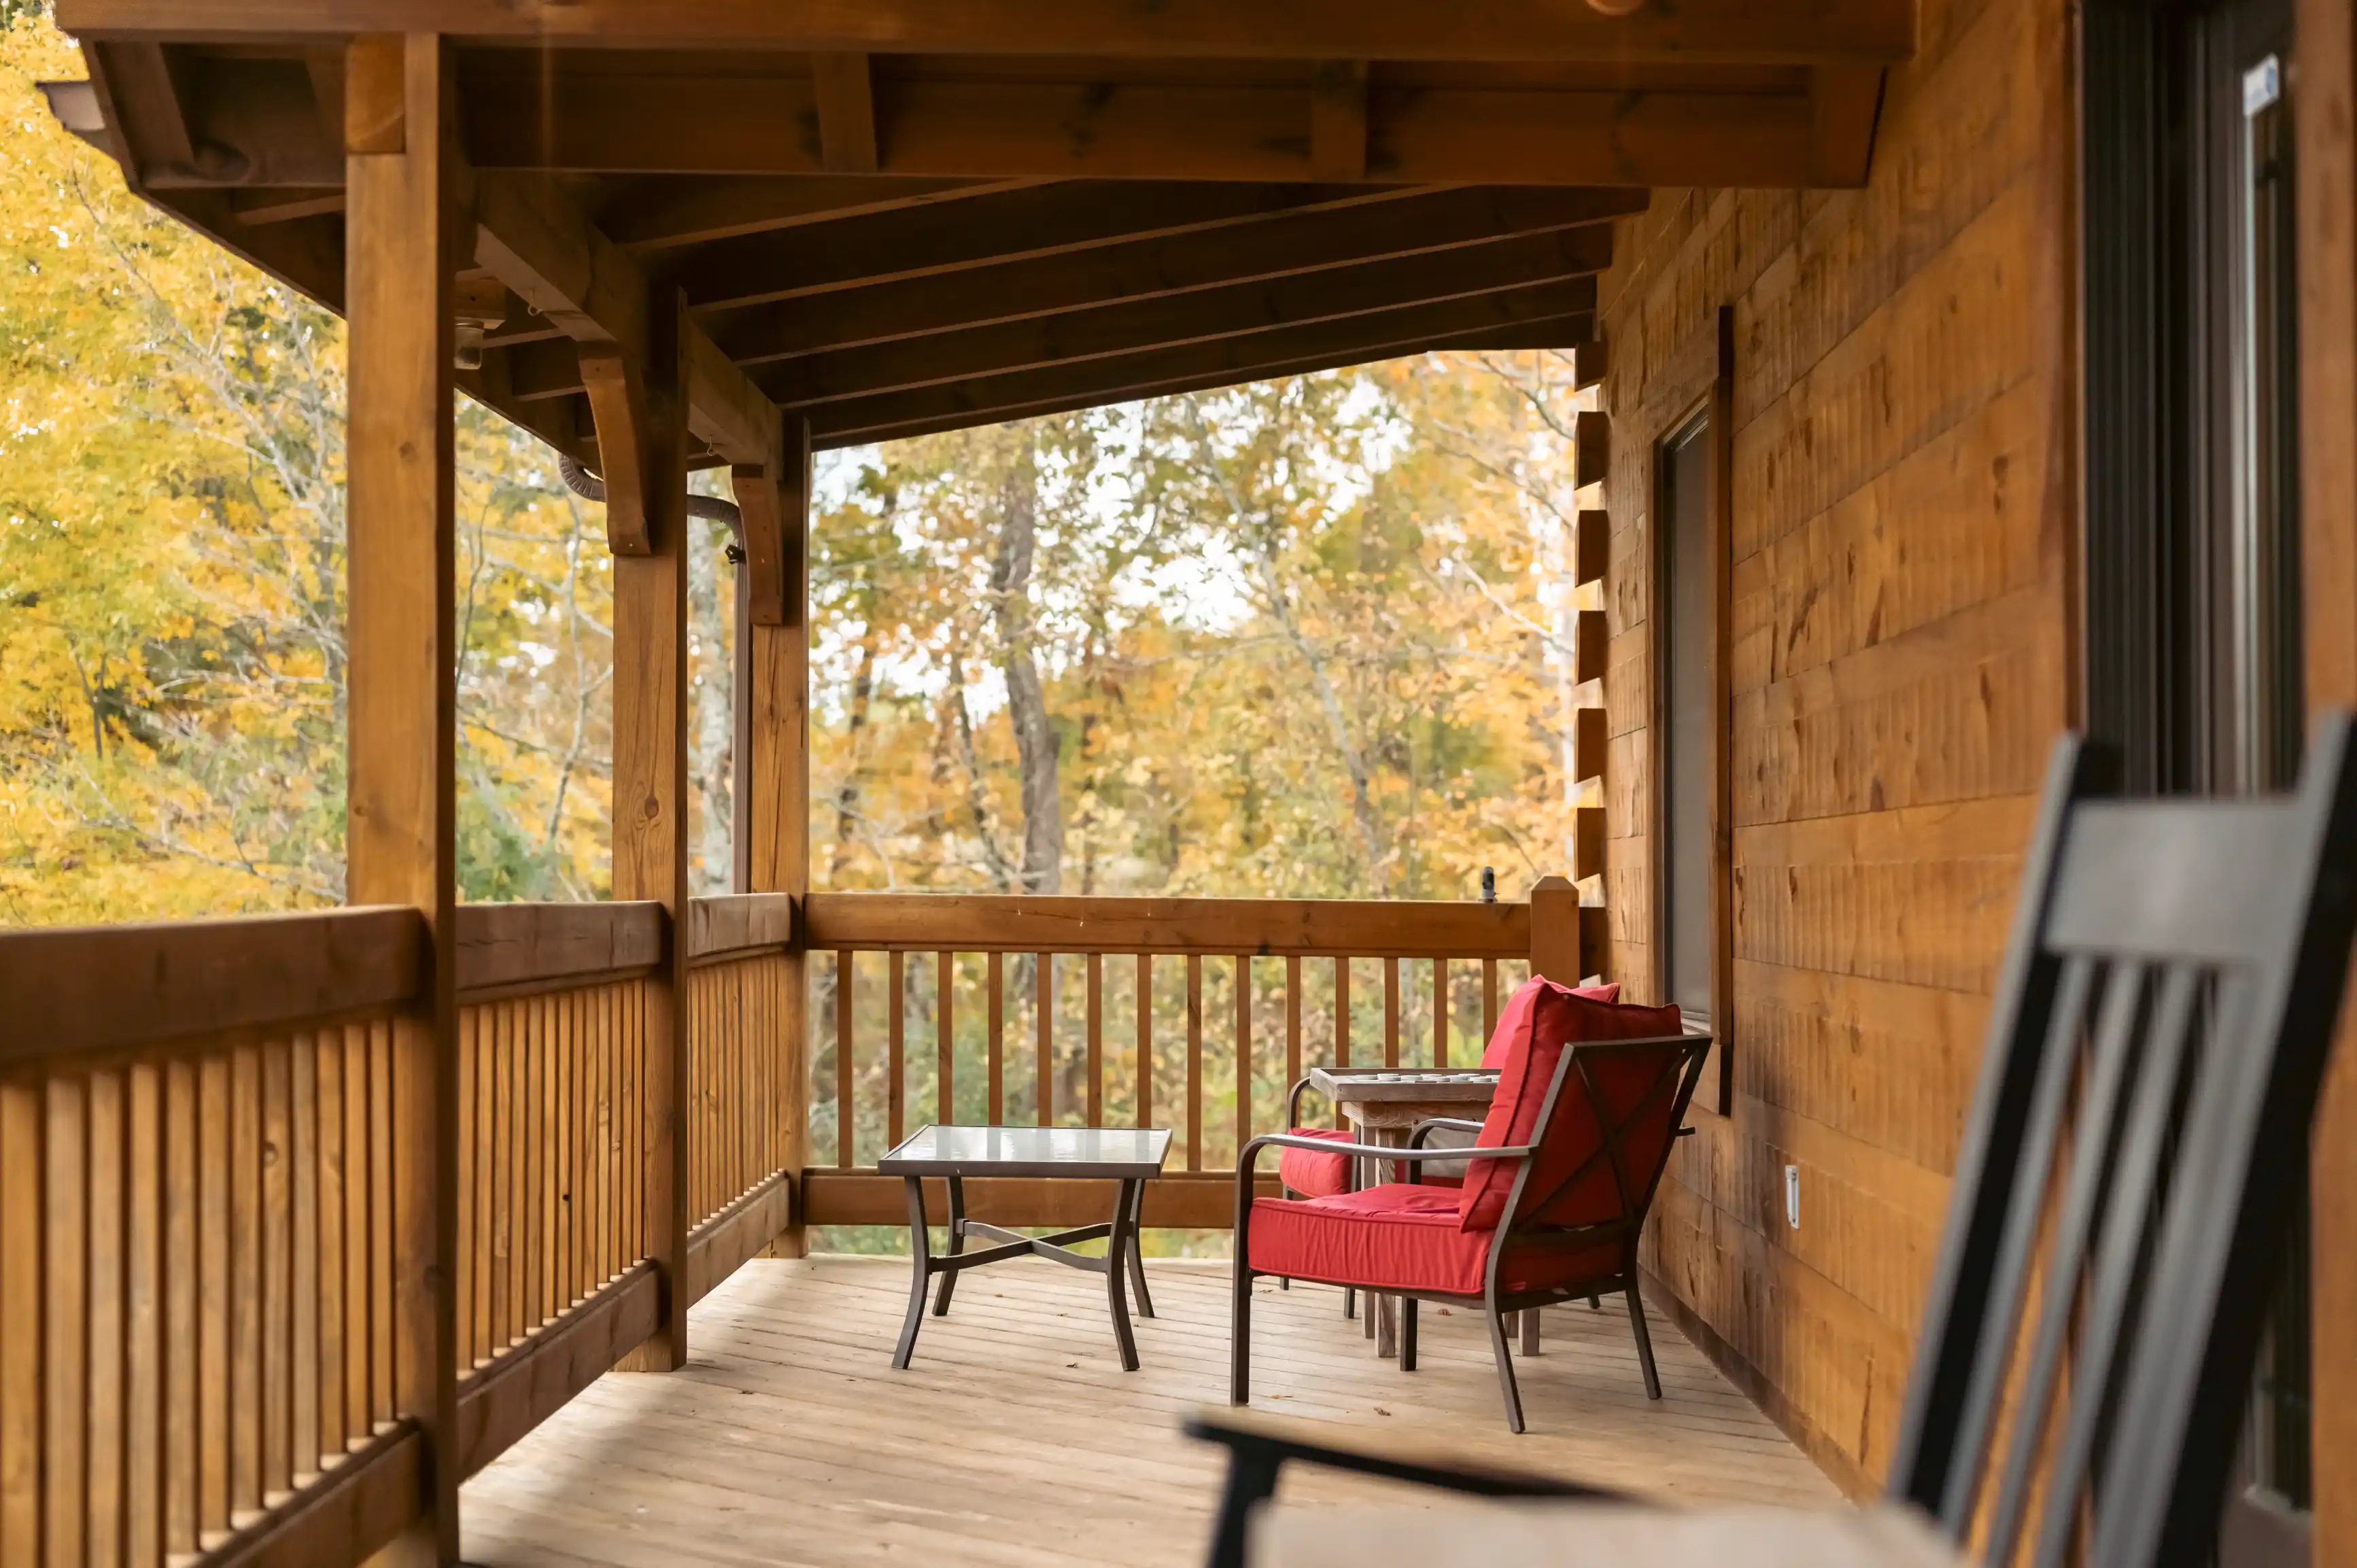 Cozy wooden cabin porch with a red chair and a table overlooking autumn trees.